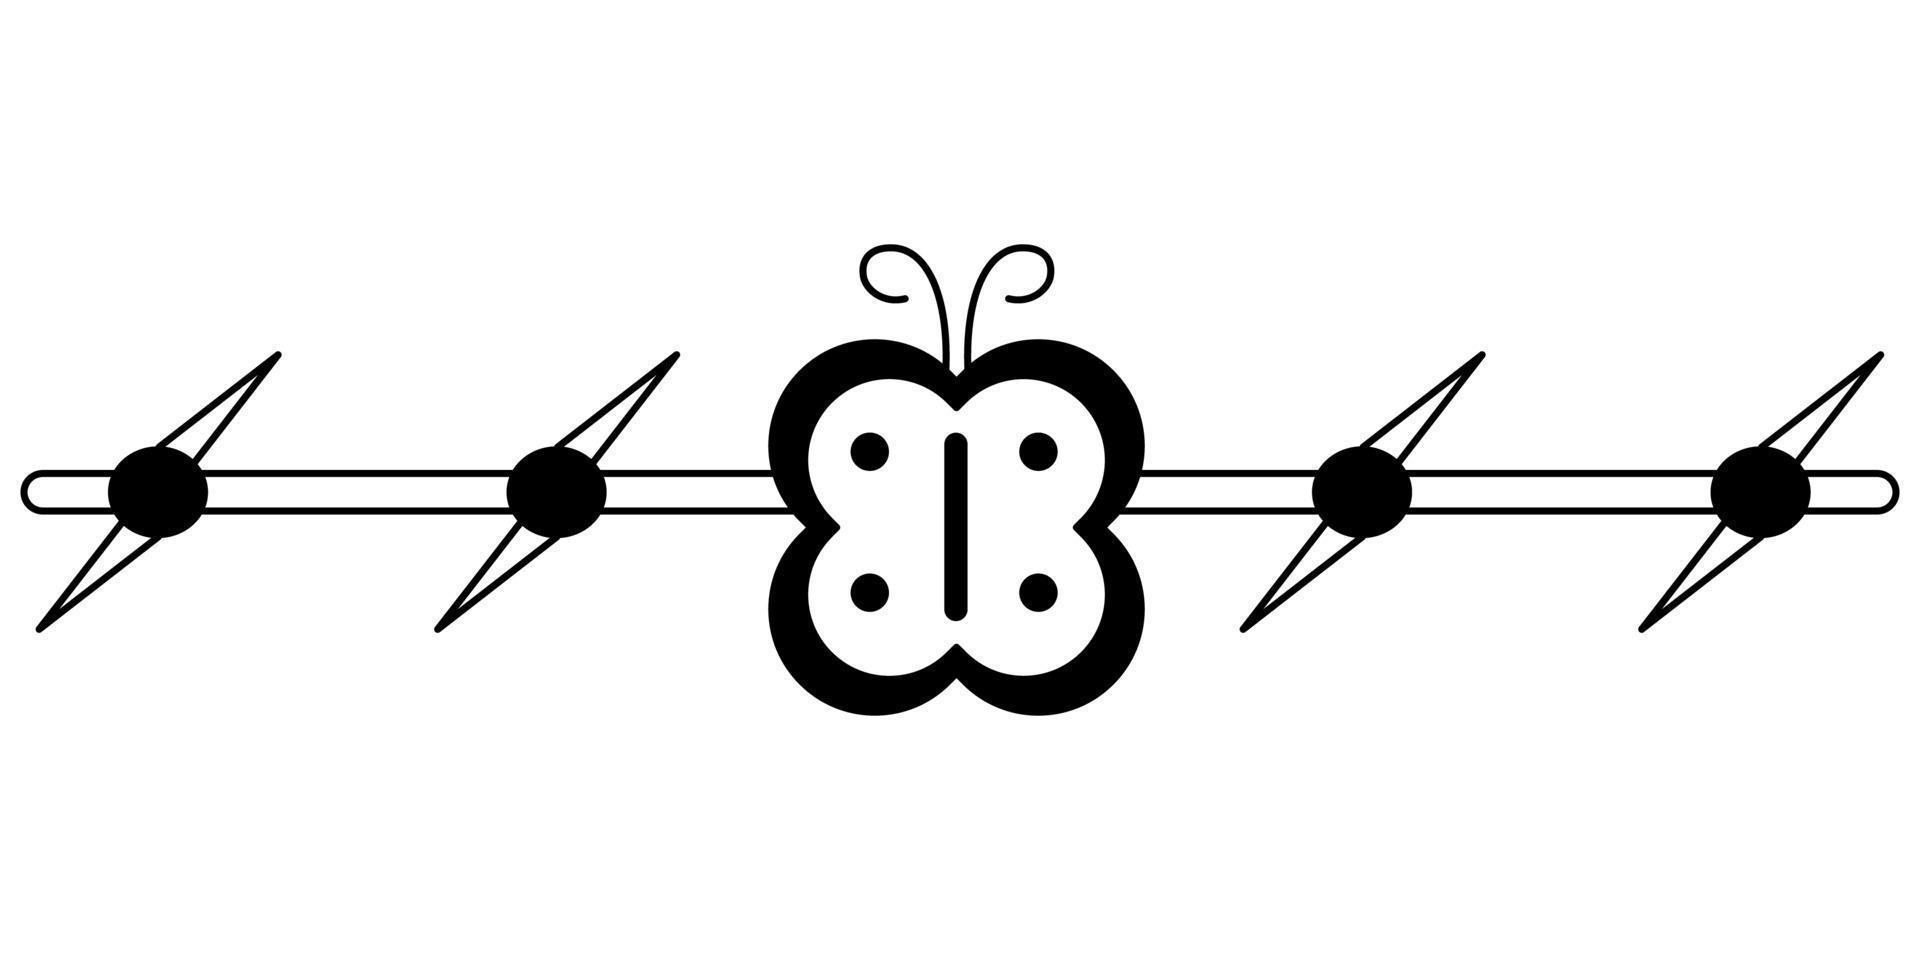 Tattoo barbed wire with a butterfly in the style of the 90s, 2000s. Black and white single object illustration. vector